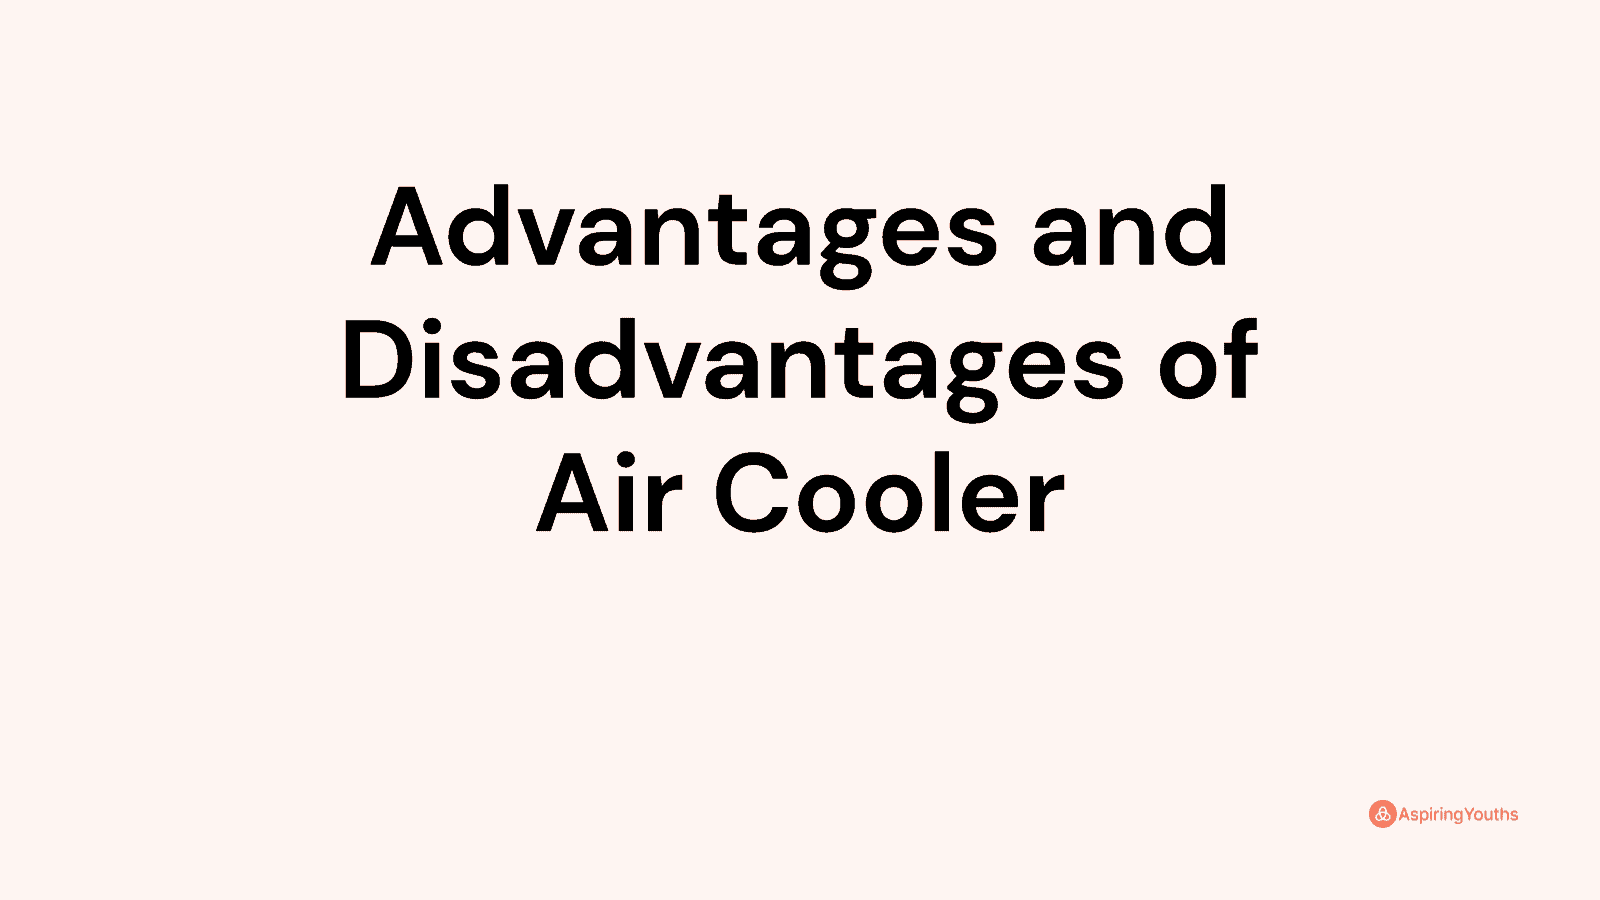 Advantages and disadvantages of Air Cooler